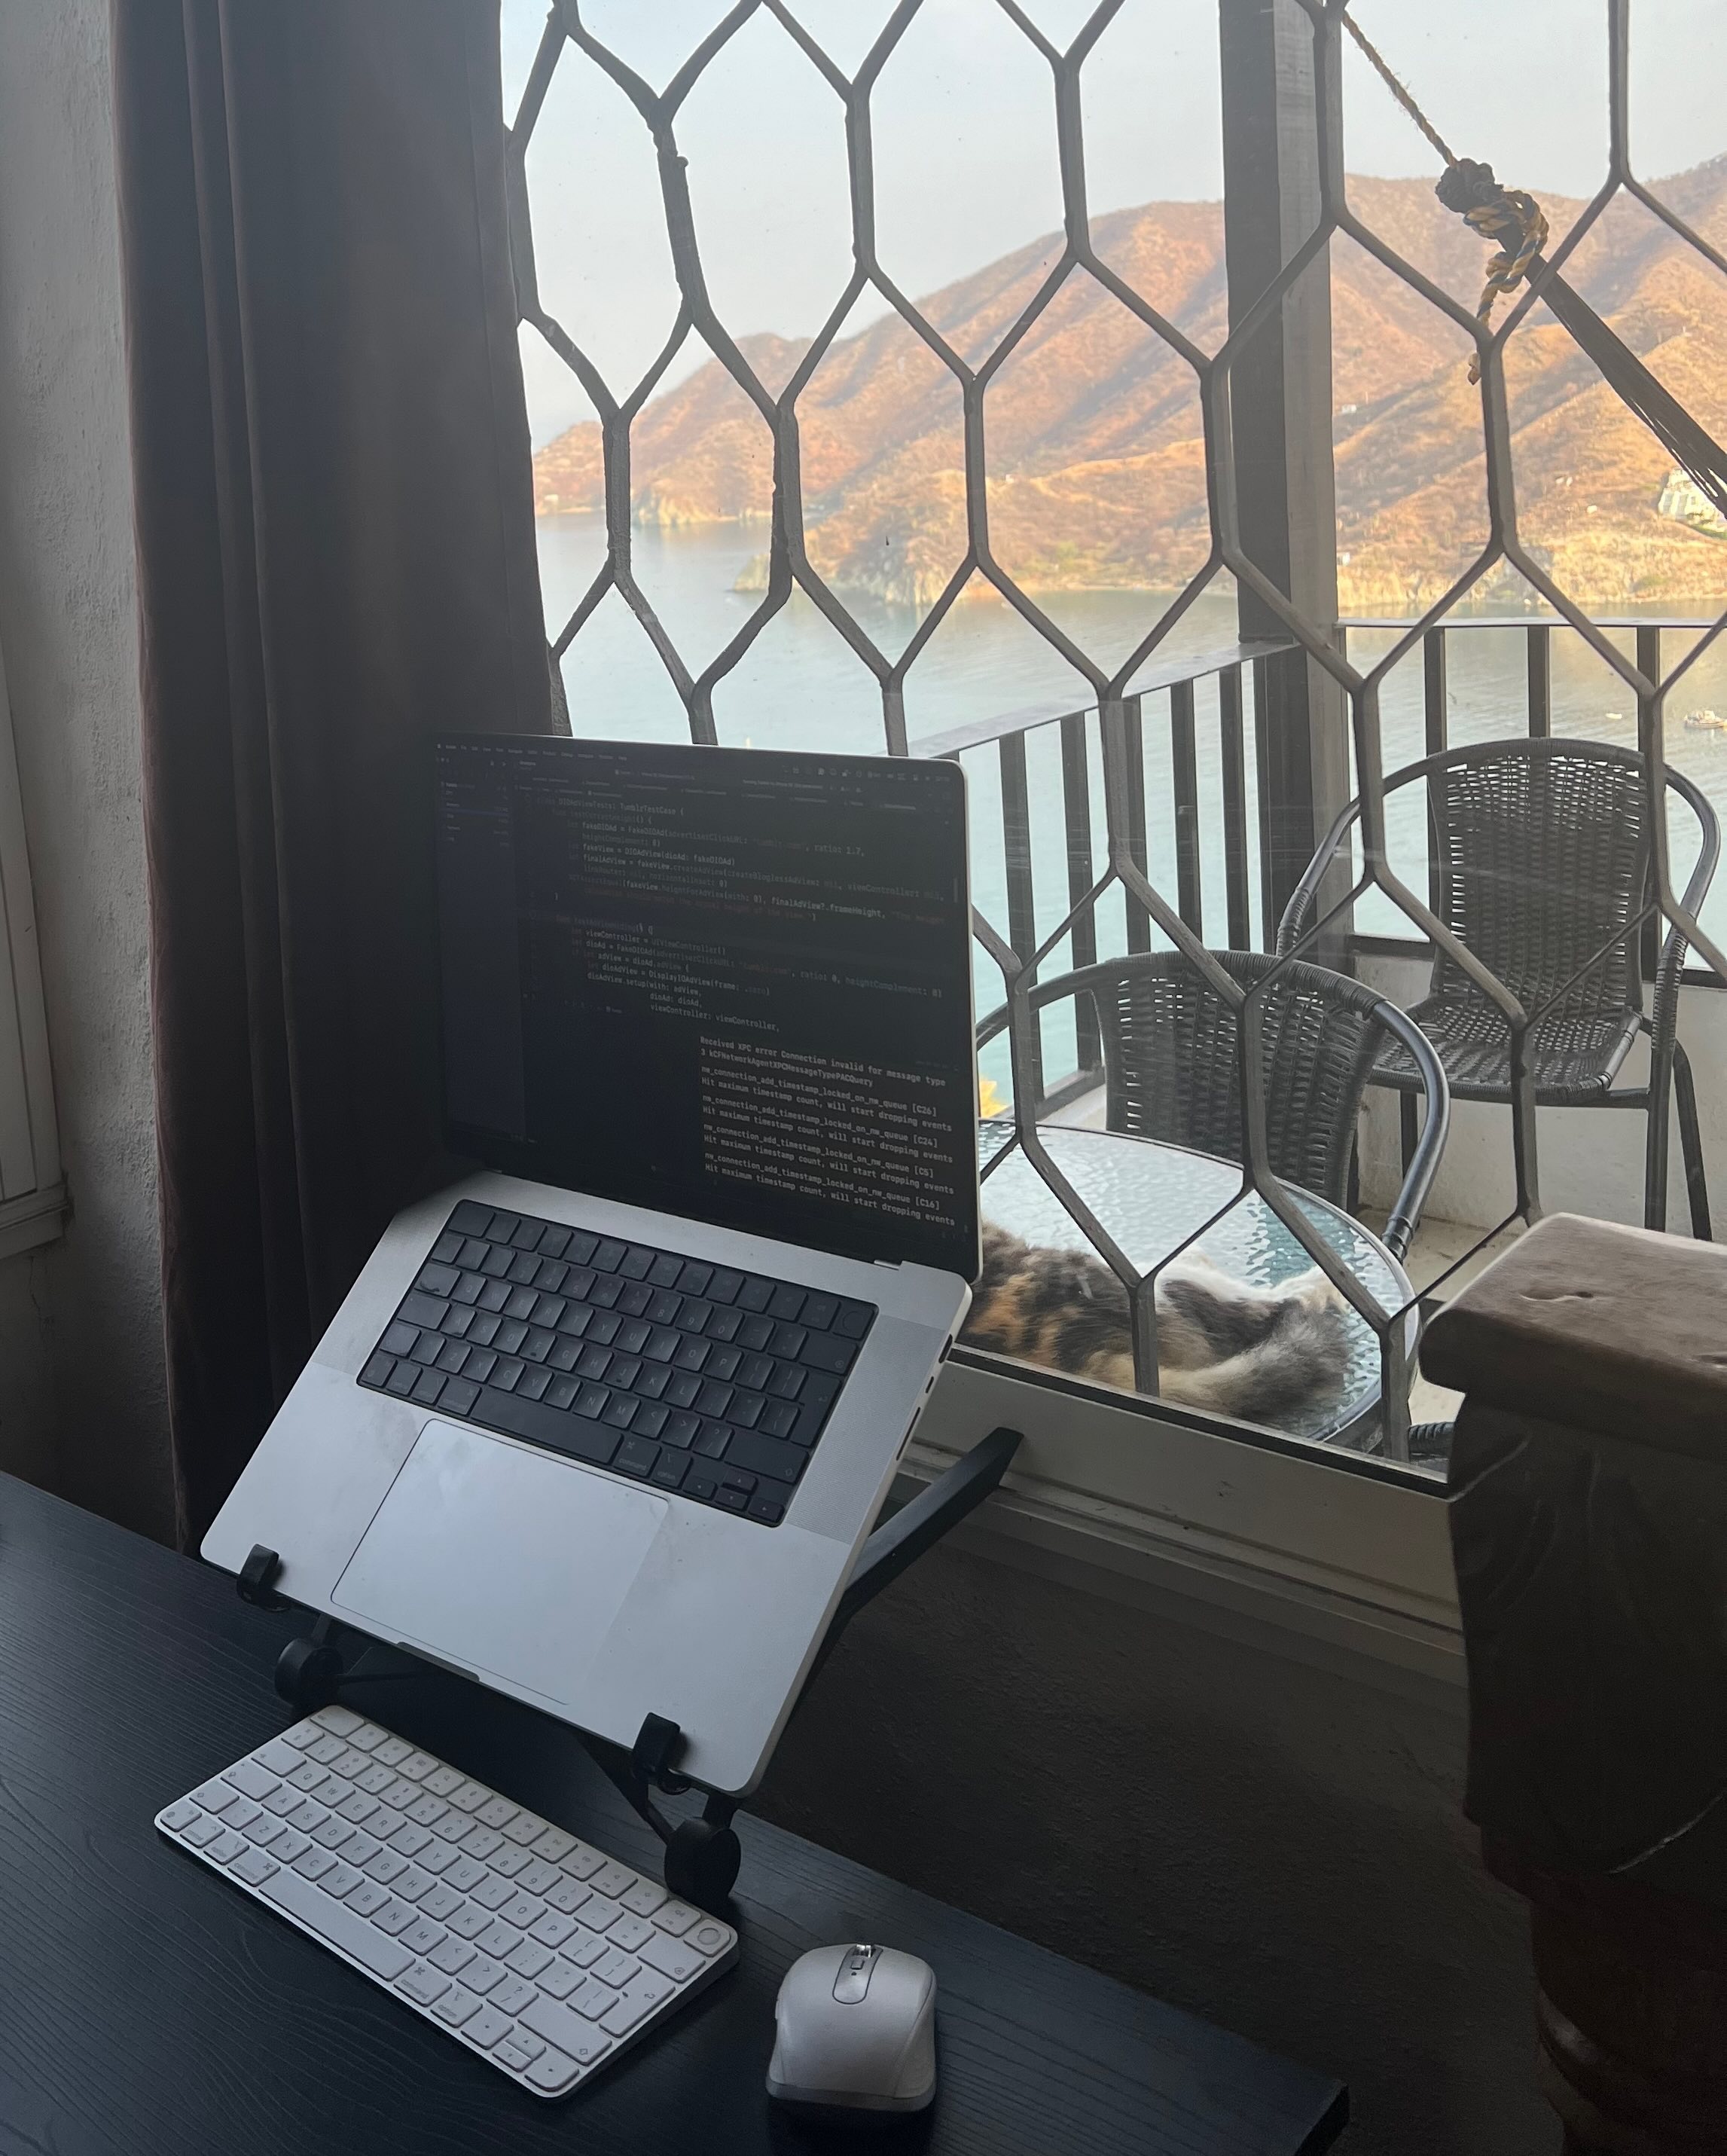 A laptop on a stand sits on a desk with a keyboard and mouse, positioned next to a window with a metal grill. The window overlooks a coastal view of Taganga, Colombia, with mountains in the background and Raúl lounging outside on a chair.